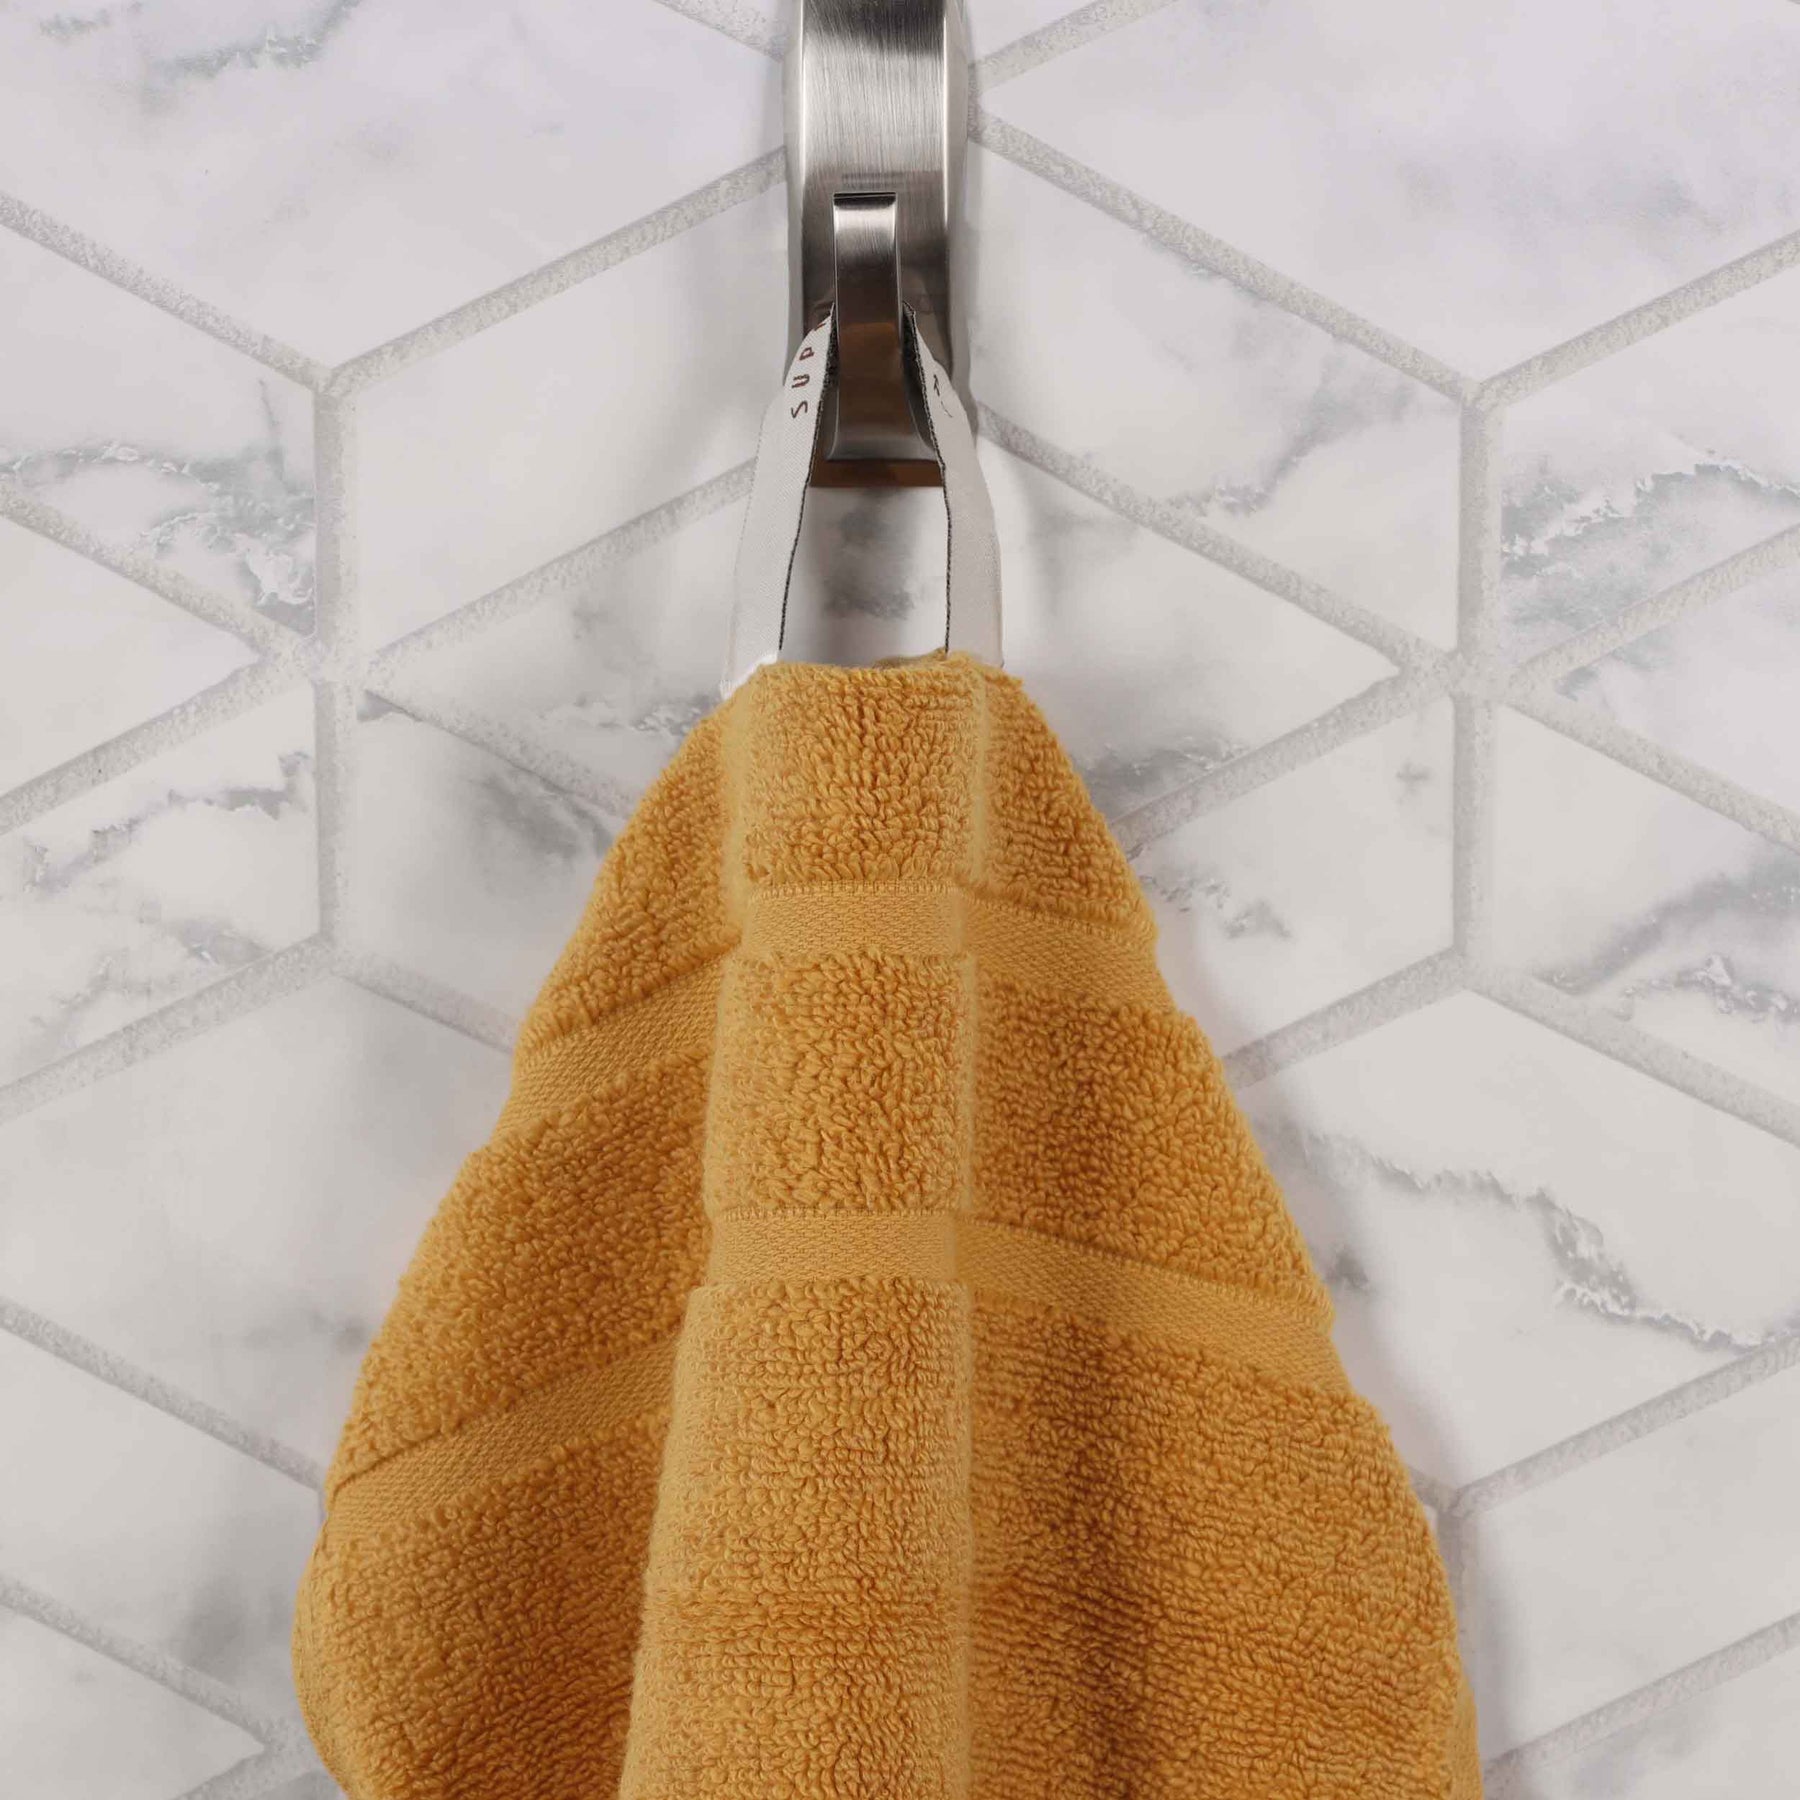 Kitchen Towels Dishcloths White Waffle Weave Bleach Friendly, Set of 8, 12  in x 12 in, Absorbent Cleaning Dish Cloths, Tan Border